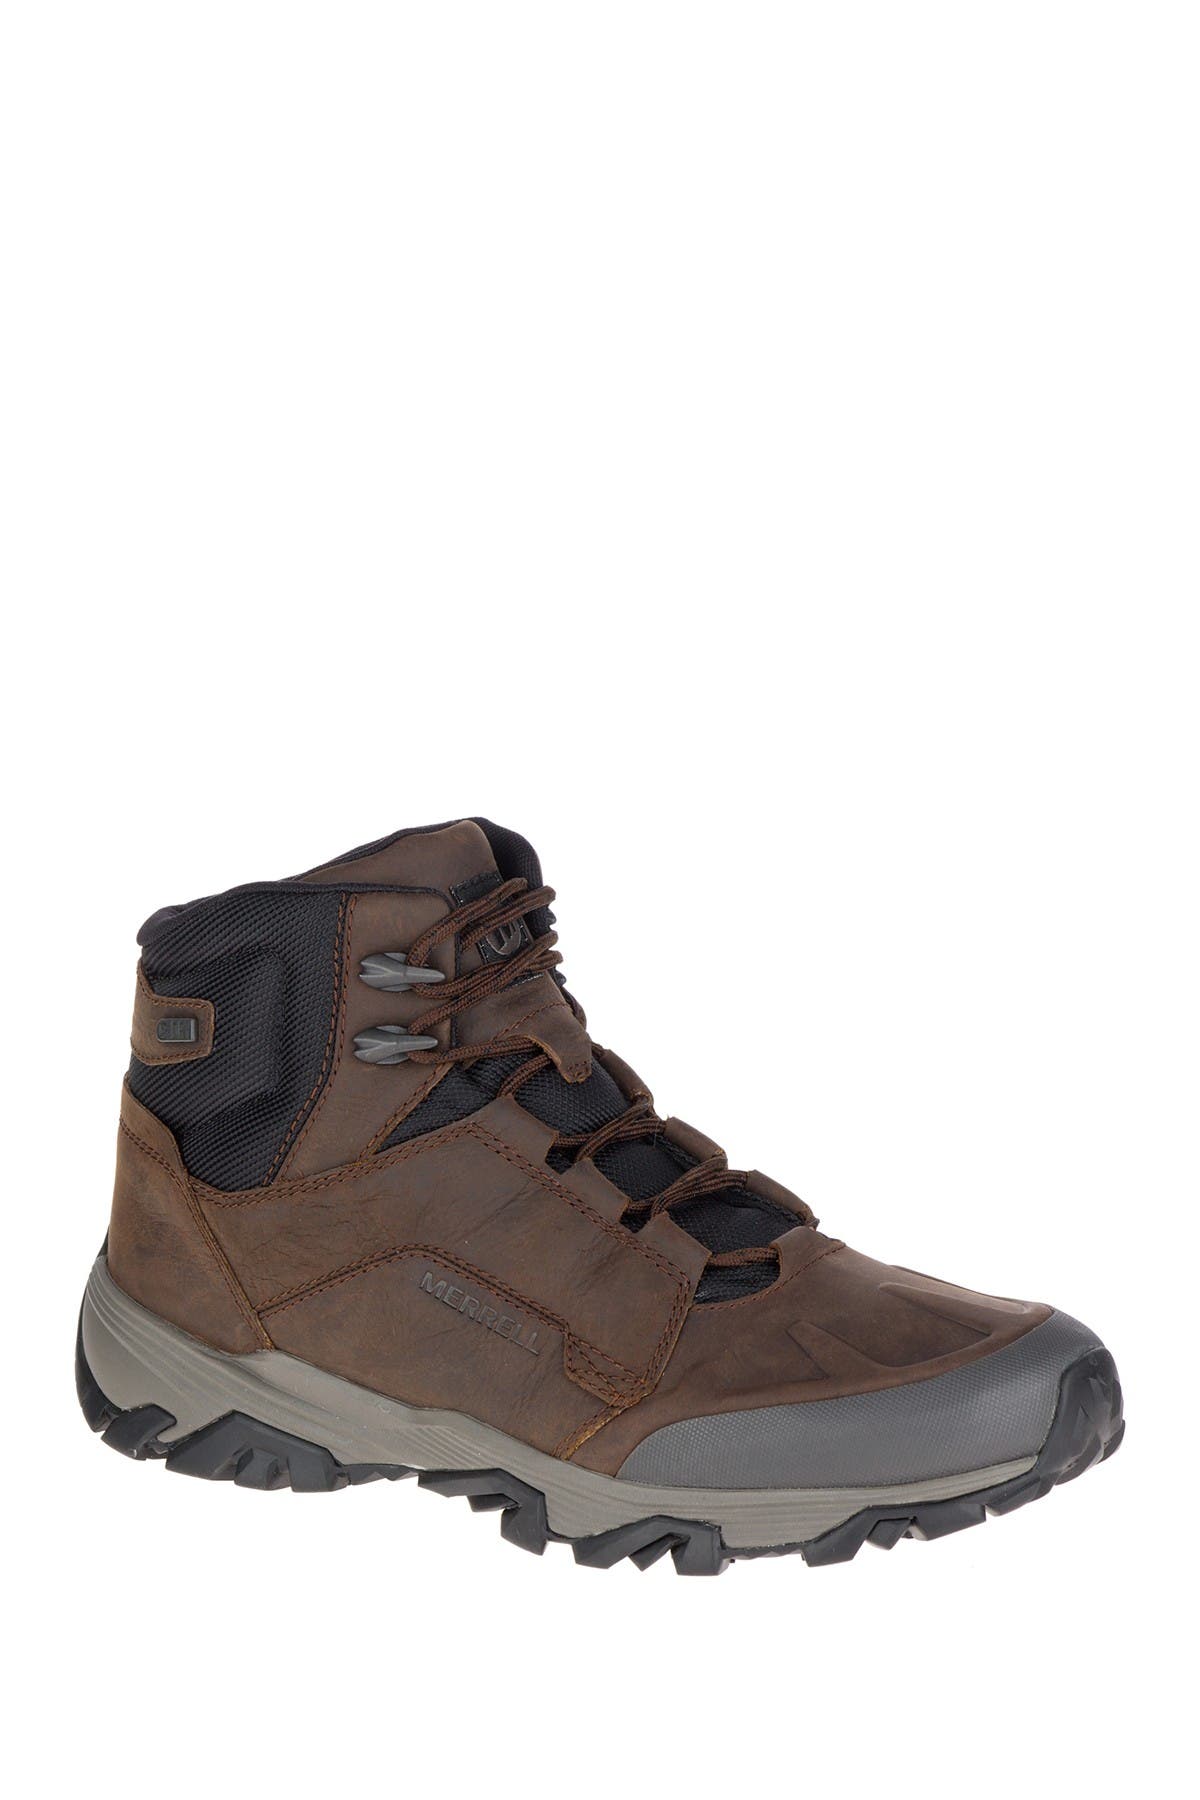 merrell coldpack ice boots